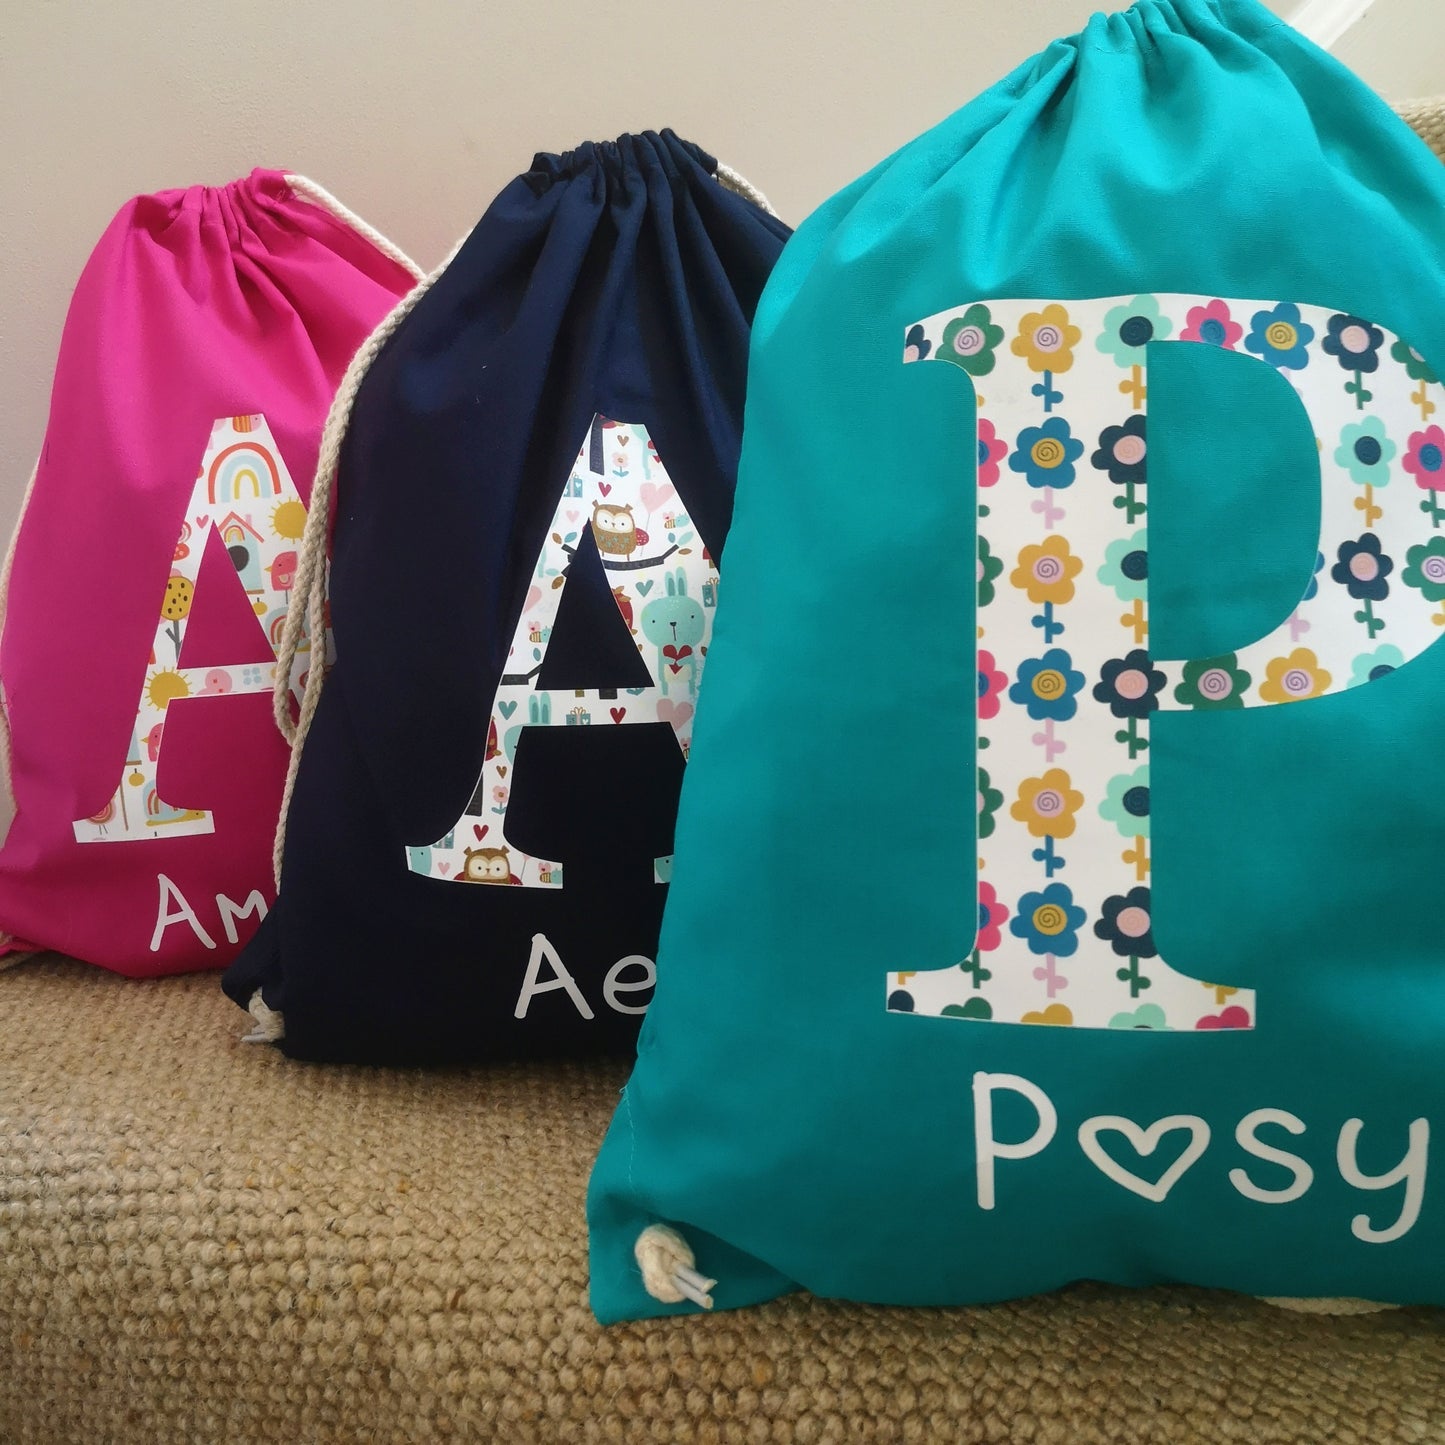 A photo showing 3 of the bag colour choices for A personalised light drawstring bag with a patterned Initial and their name underneath